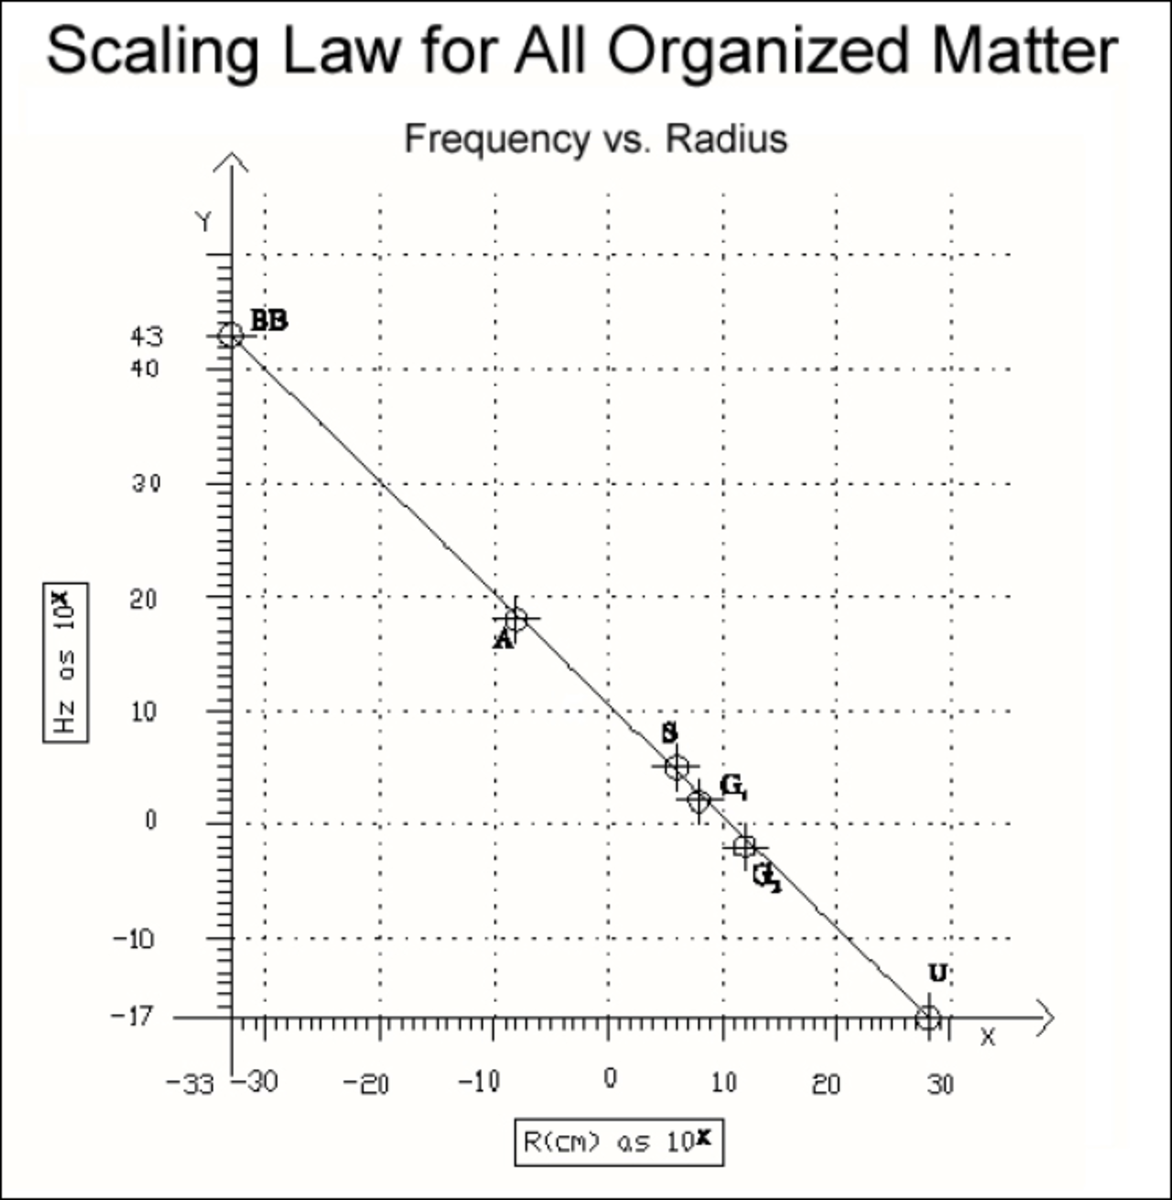 The scaling law